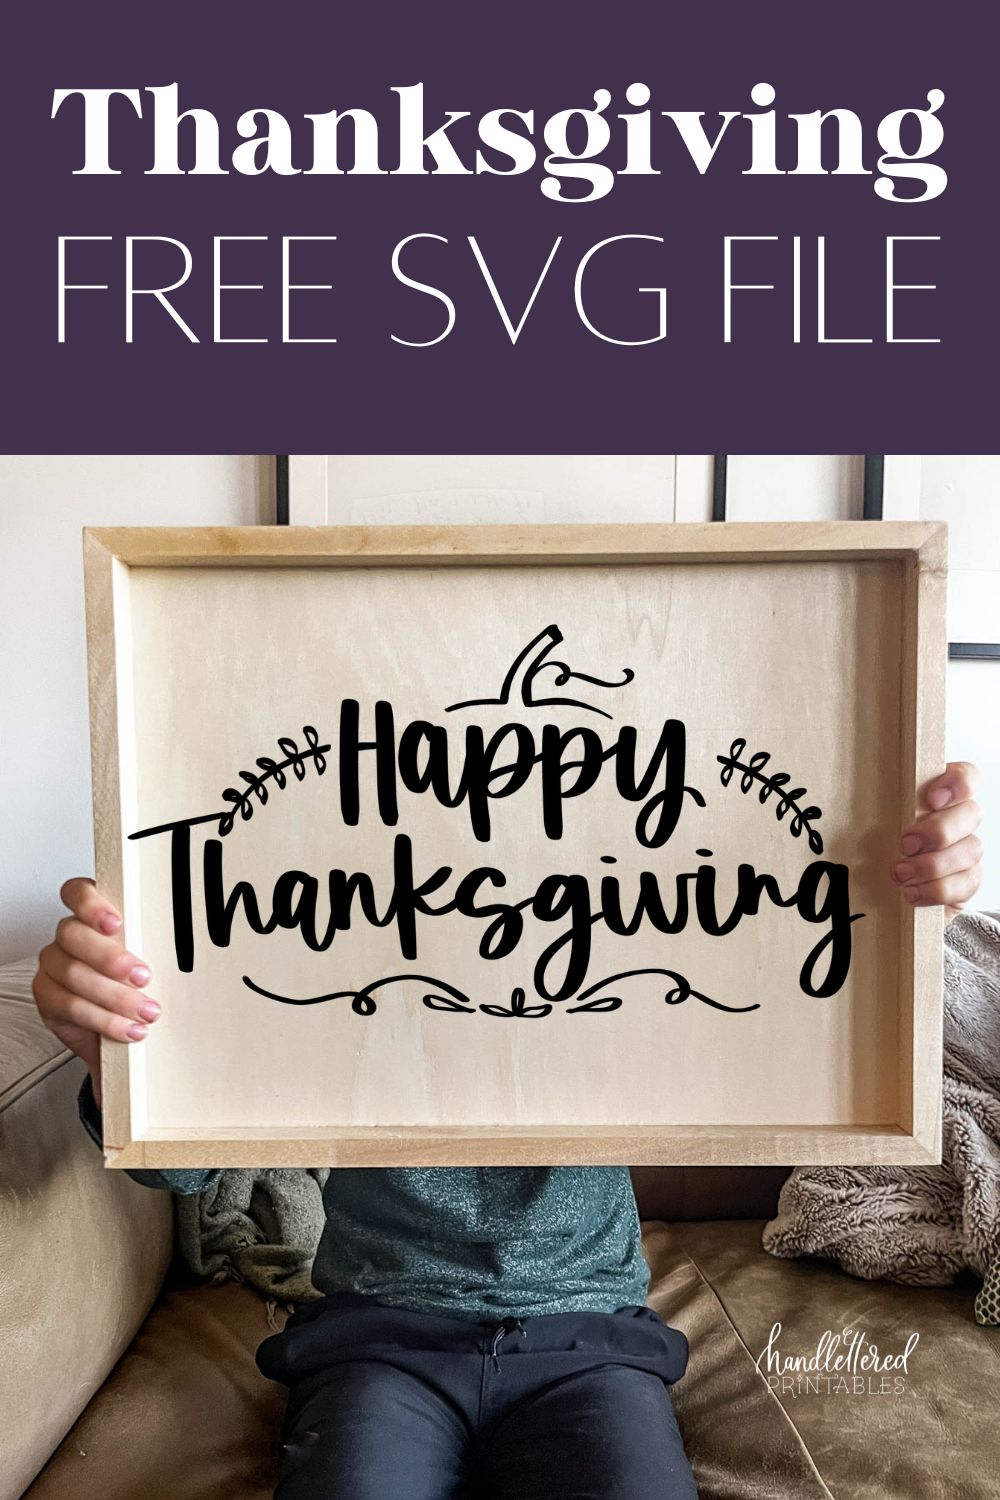 Happy Thanksgiving Free SVG File used on a wooden sign